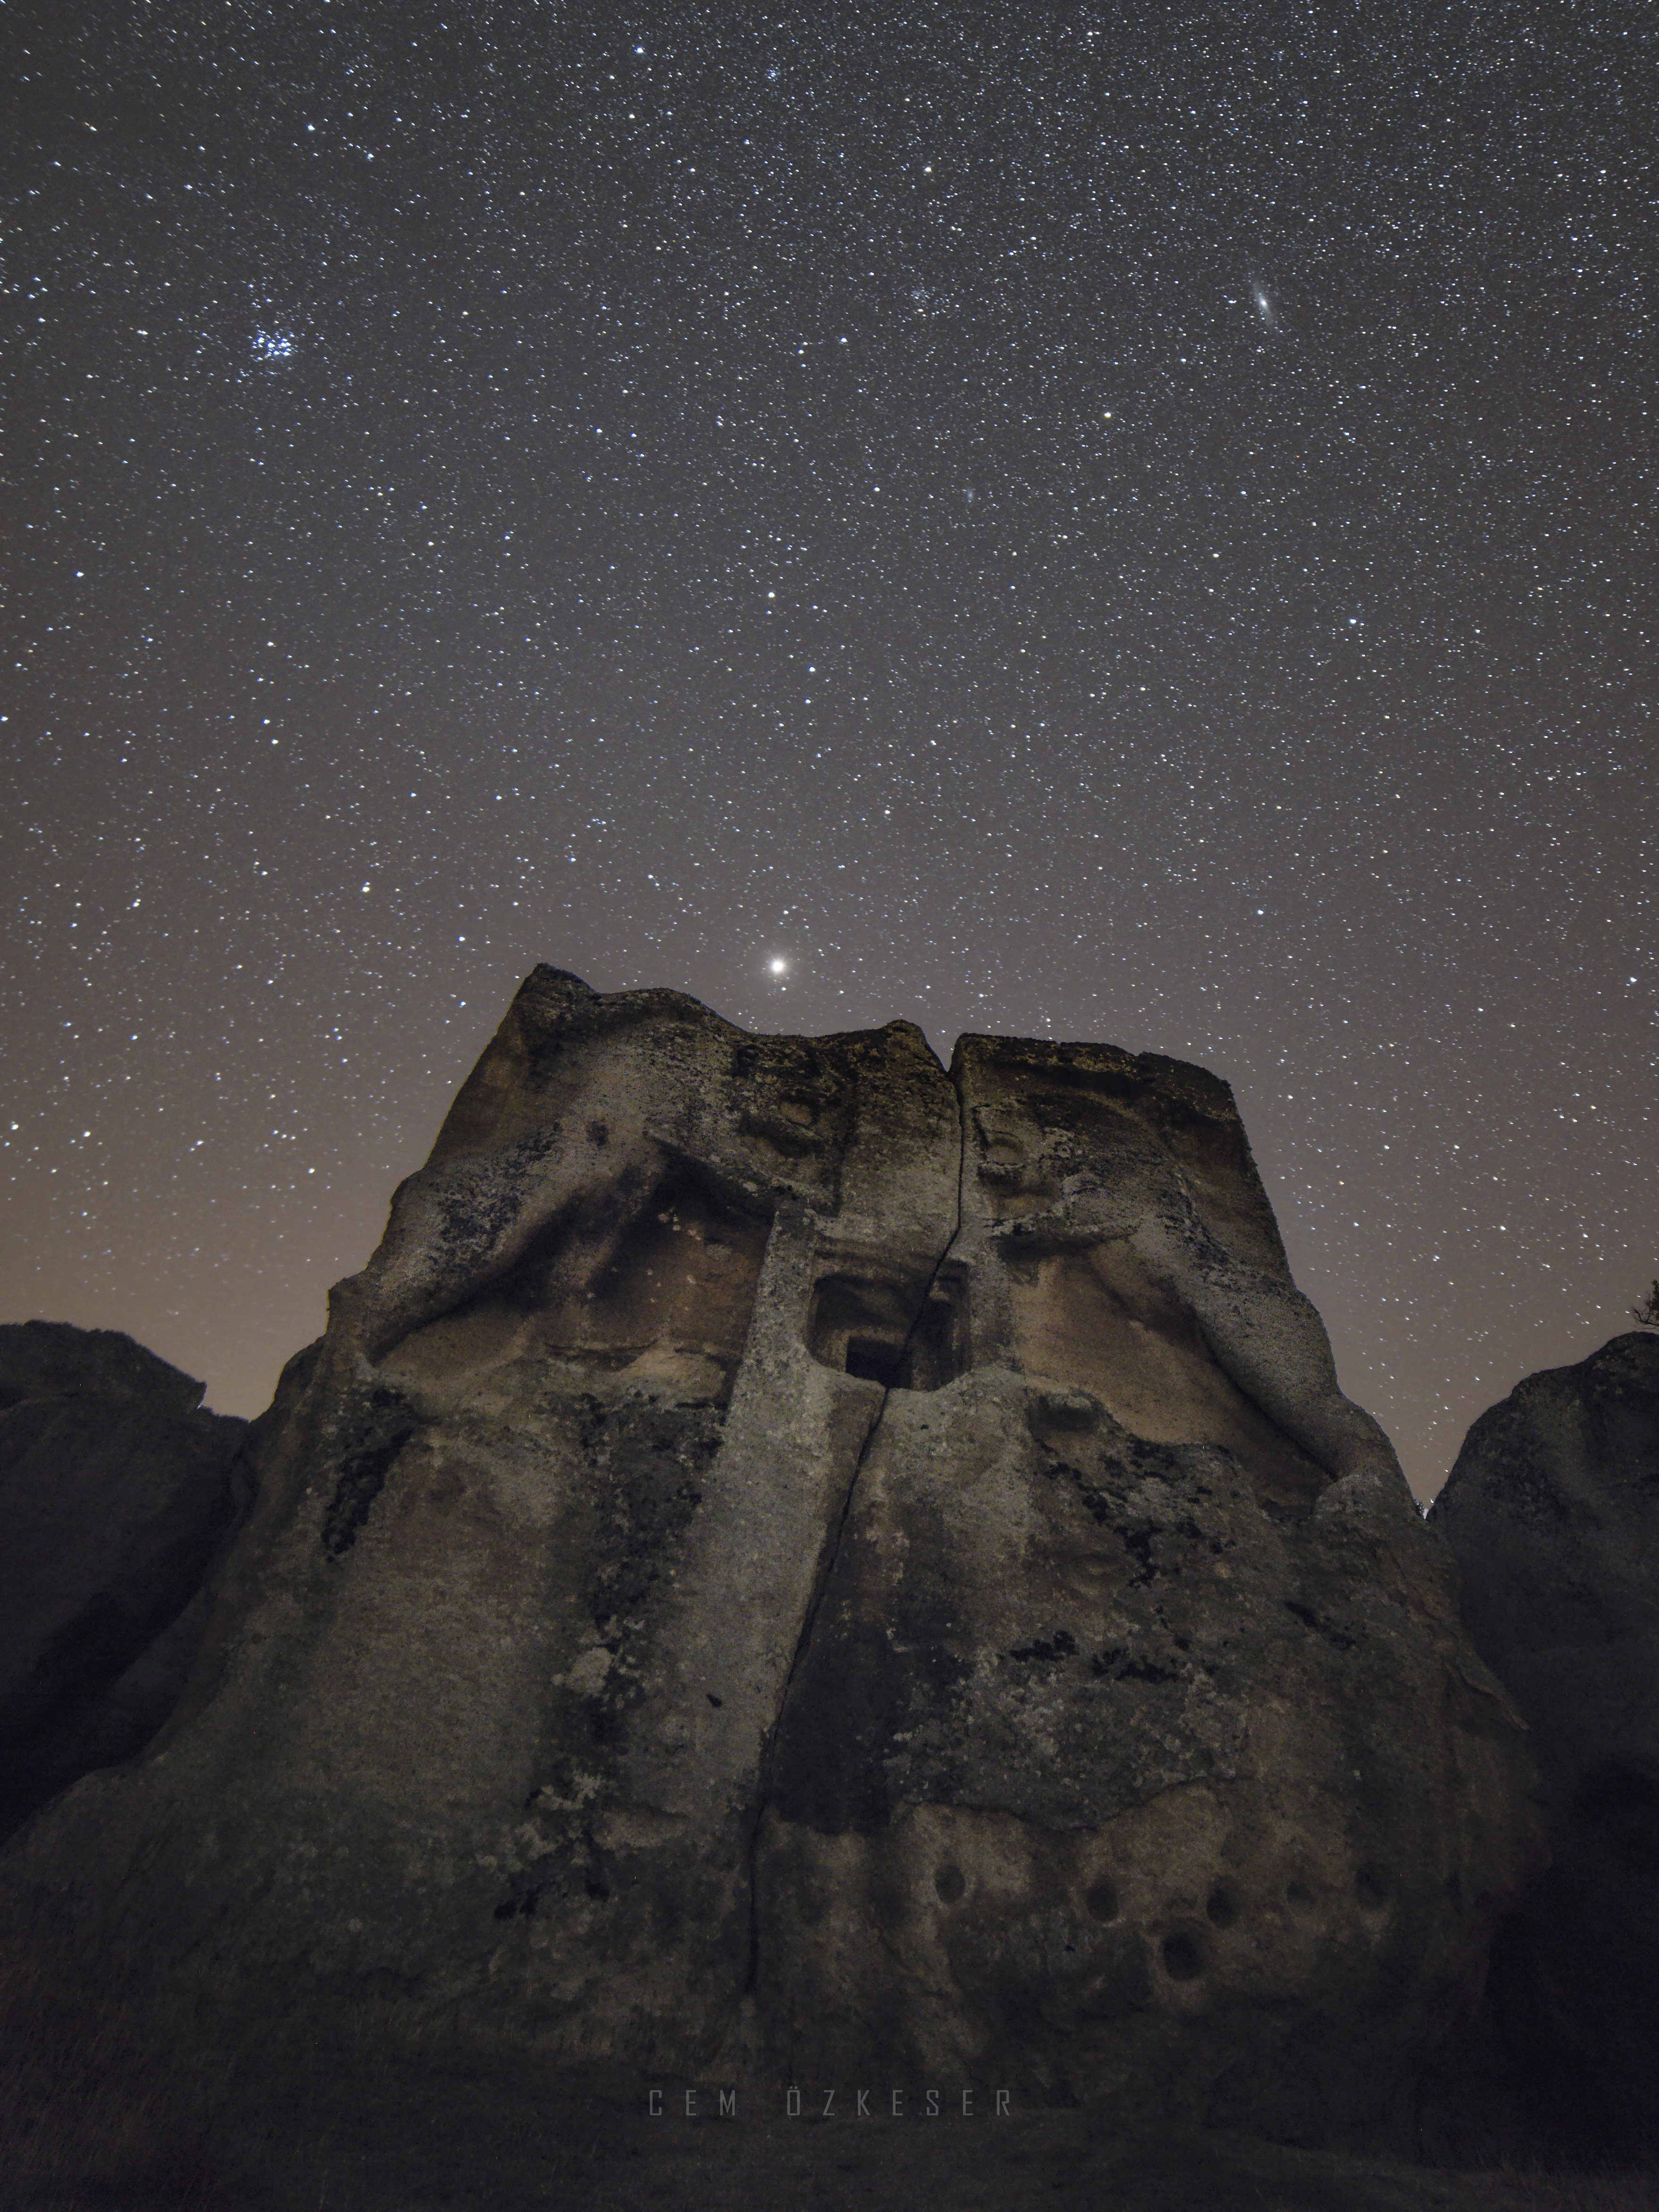 Mars, Pleiades, and Andromeda over Stone Lions